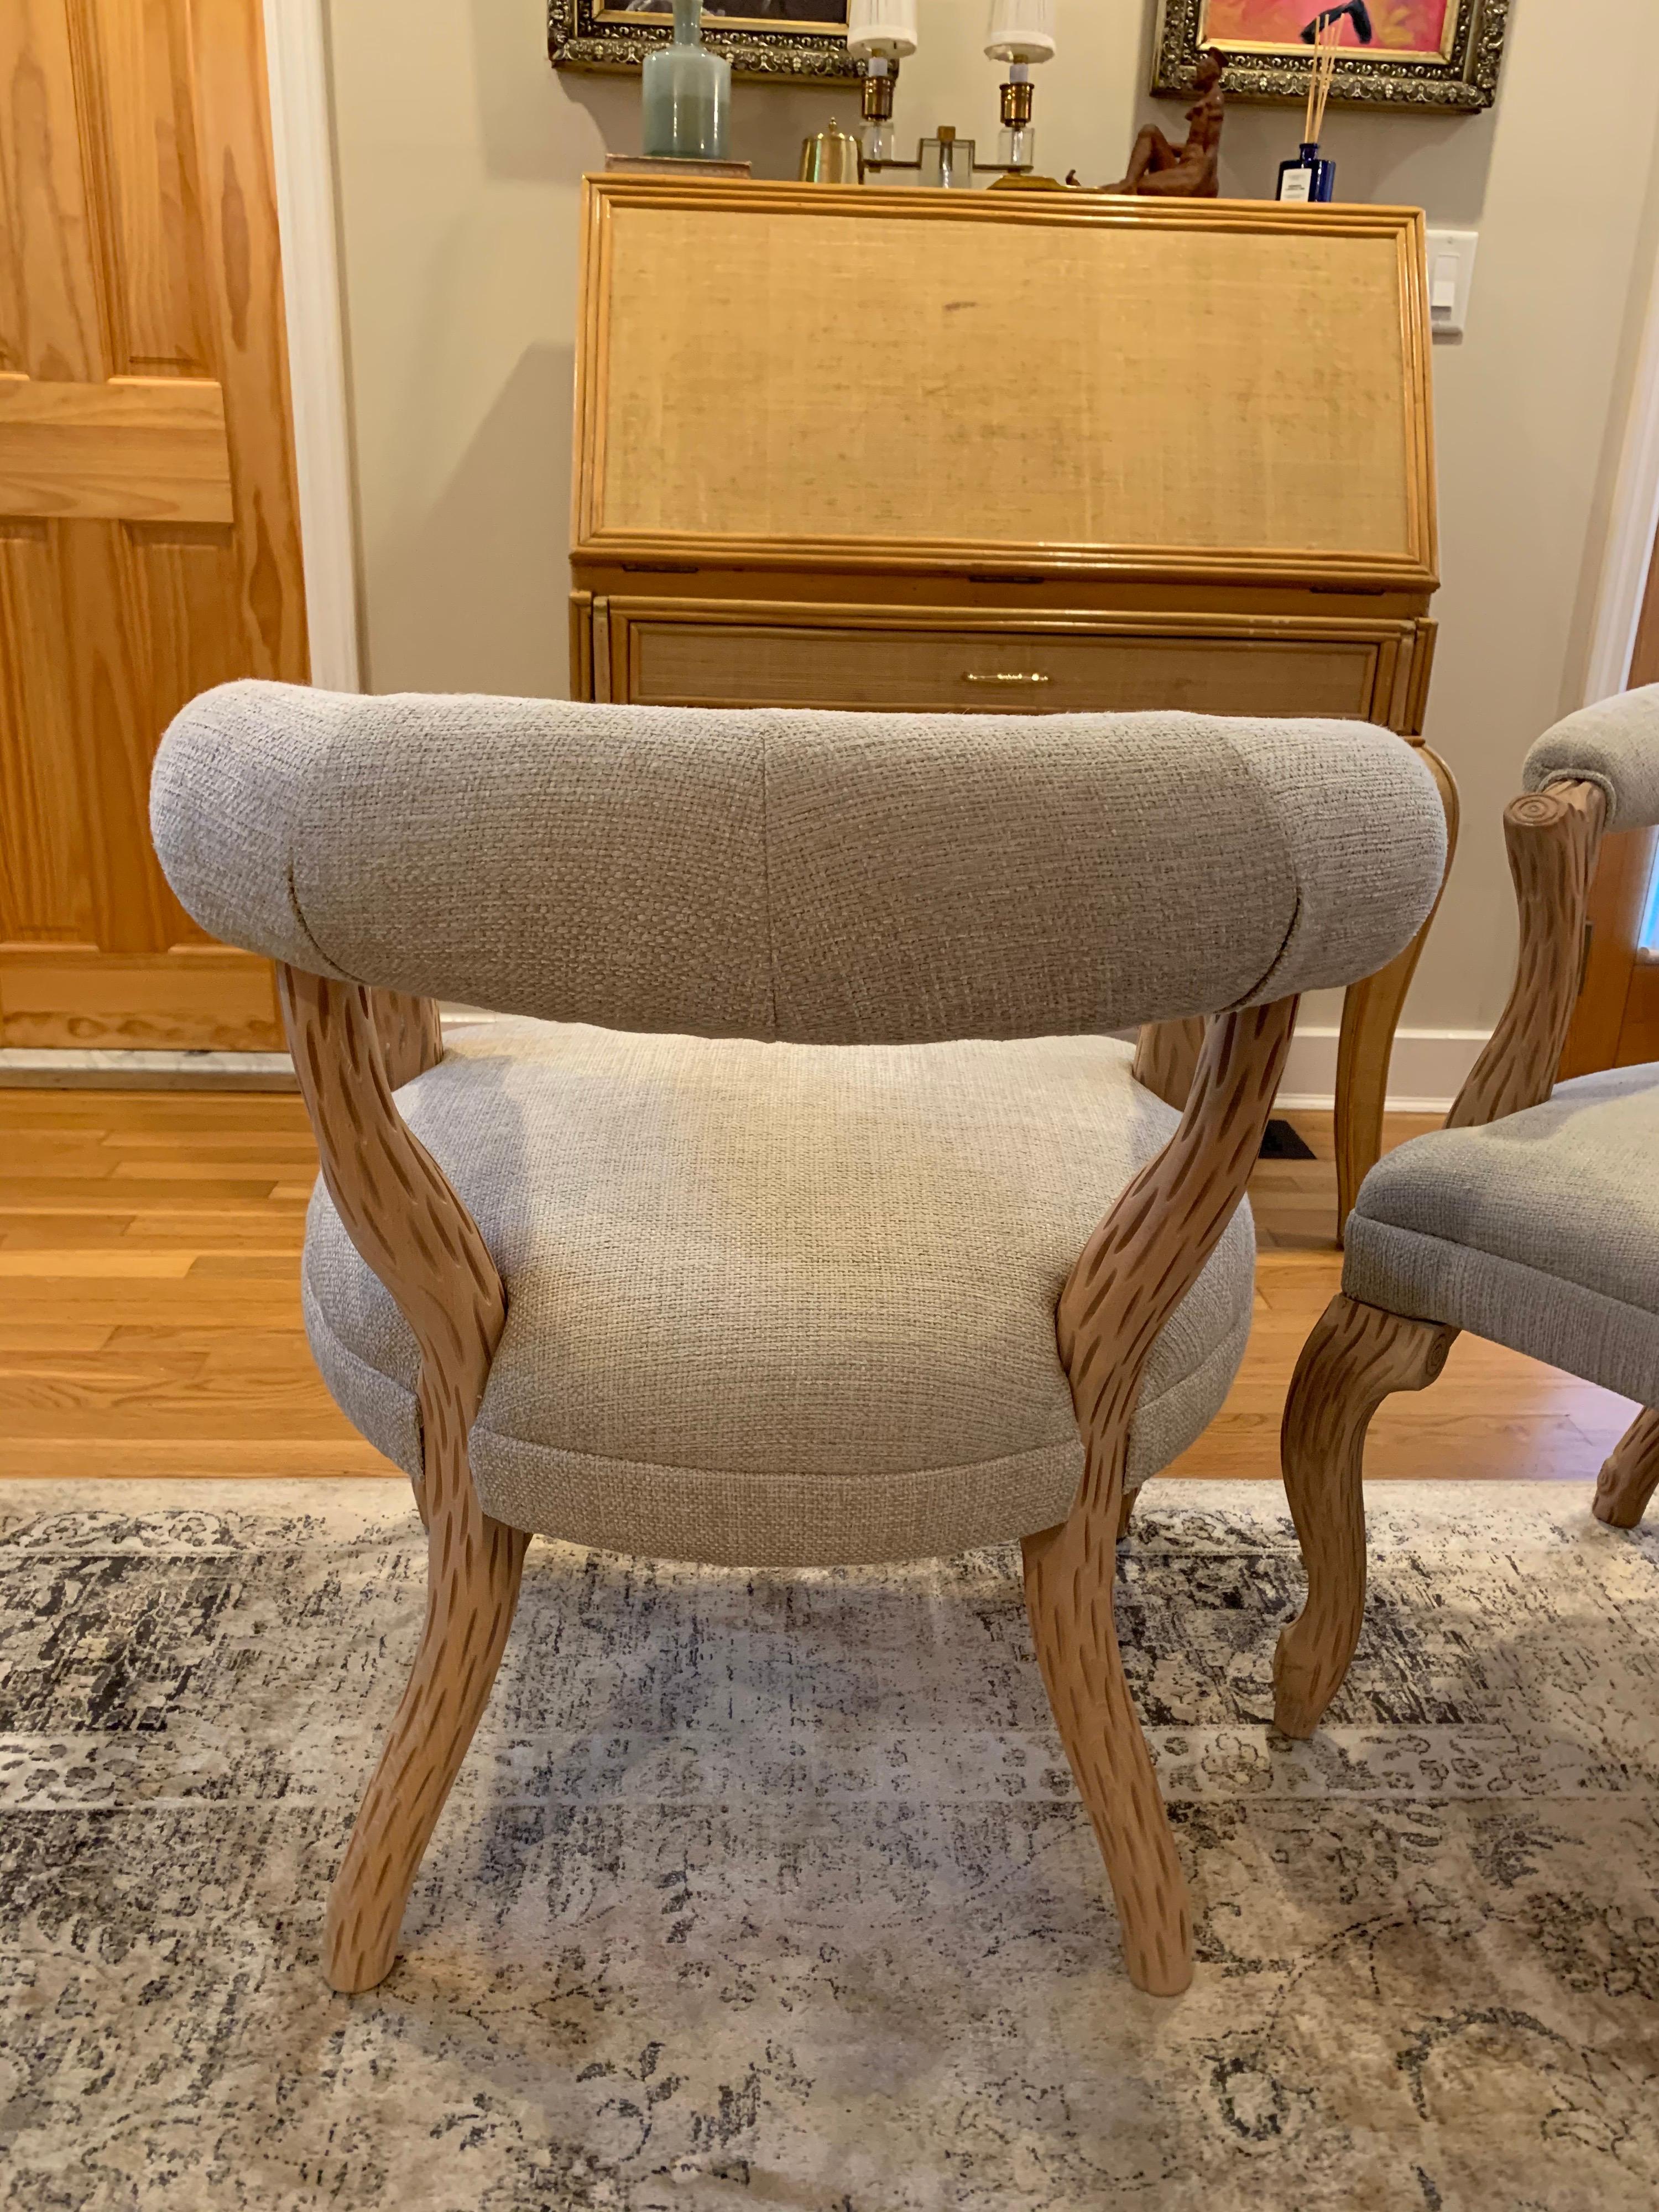 Pair of French Faux Bois Side-chairs In Good Condition For Sale In East Hampton, NY